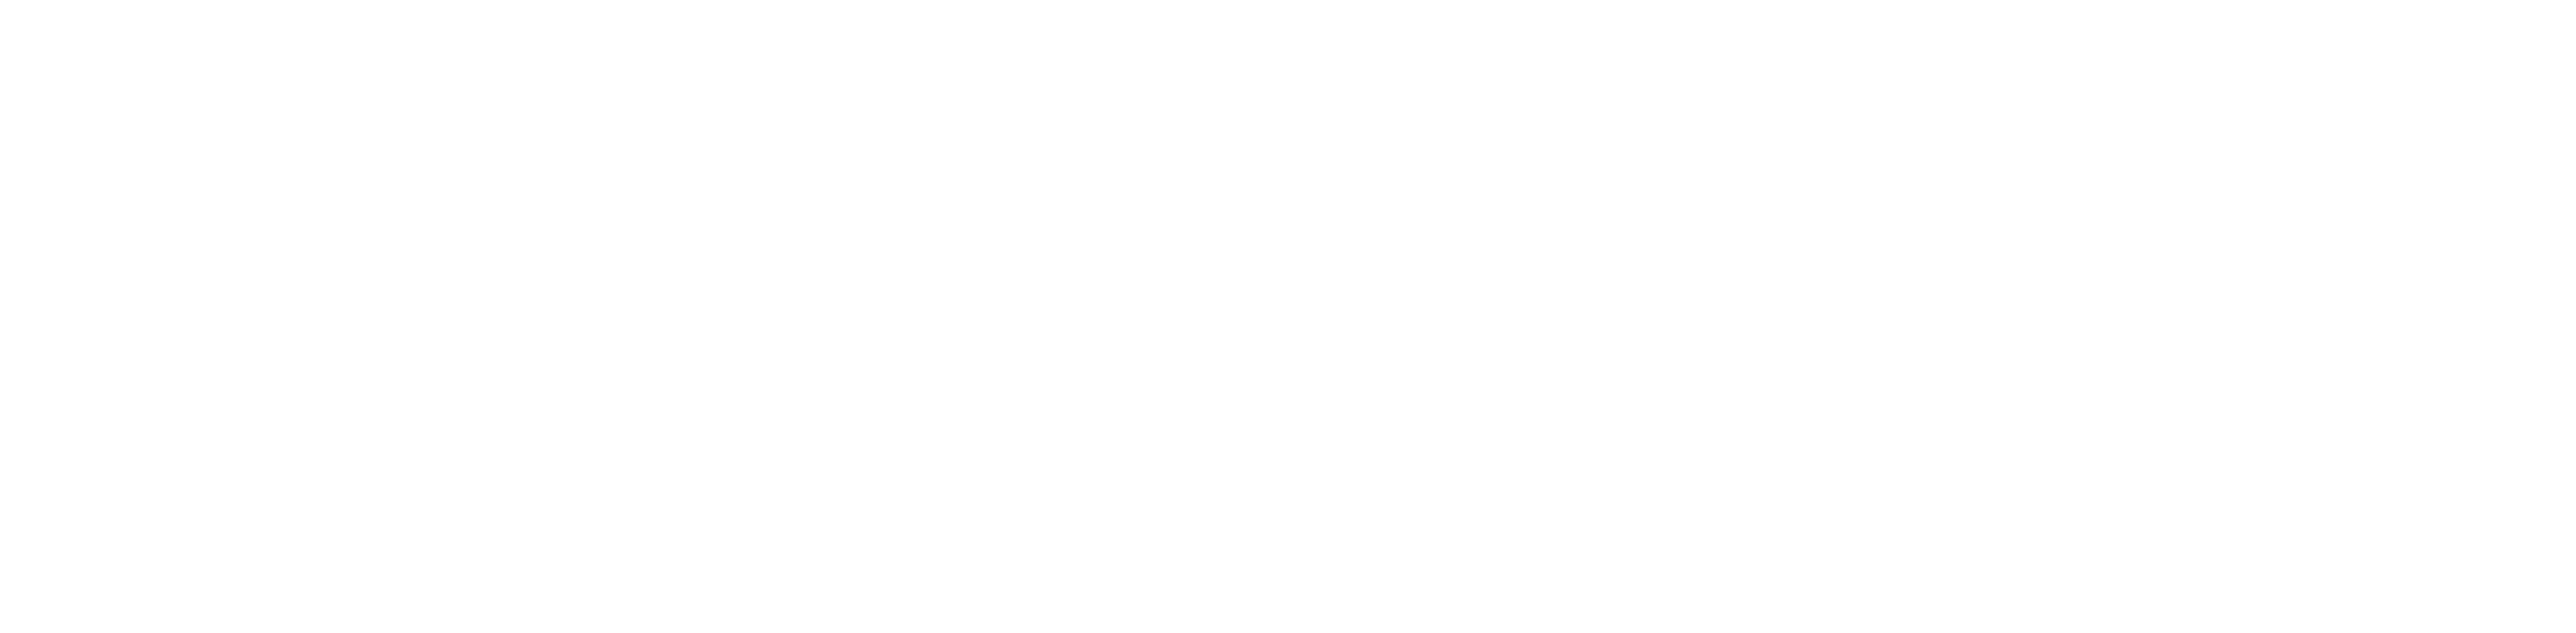 Emory Oxford College Center for Pathways and Purpose